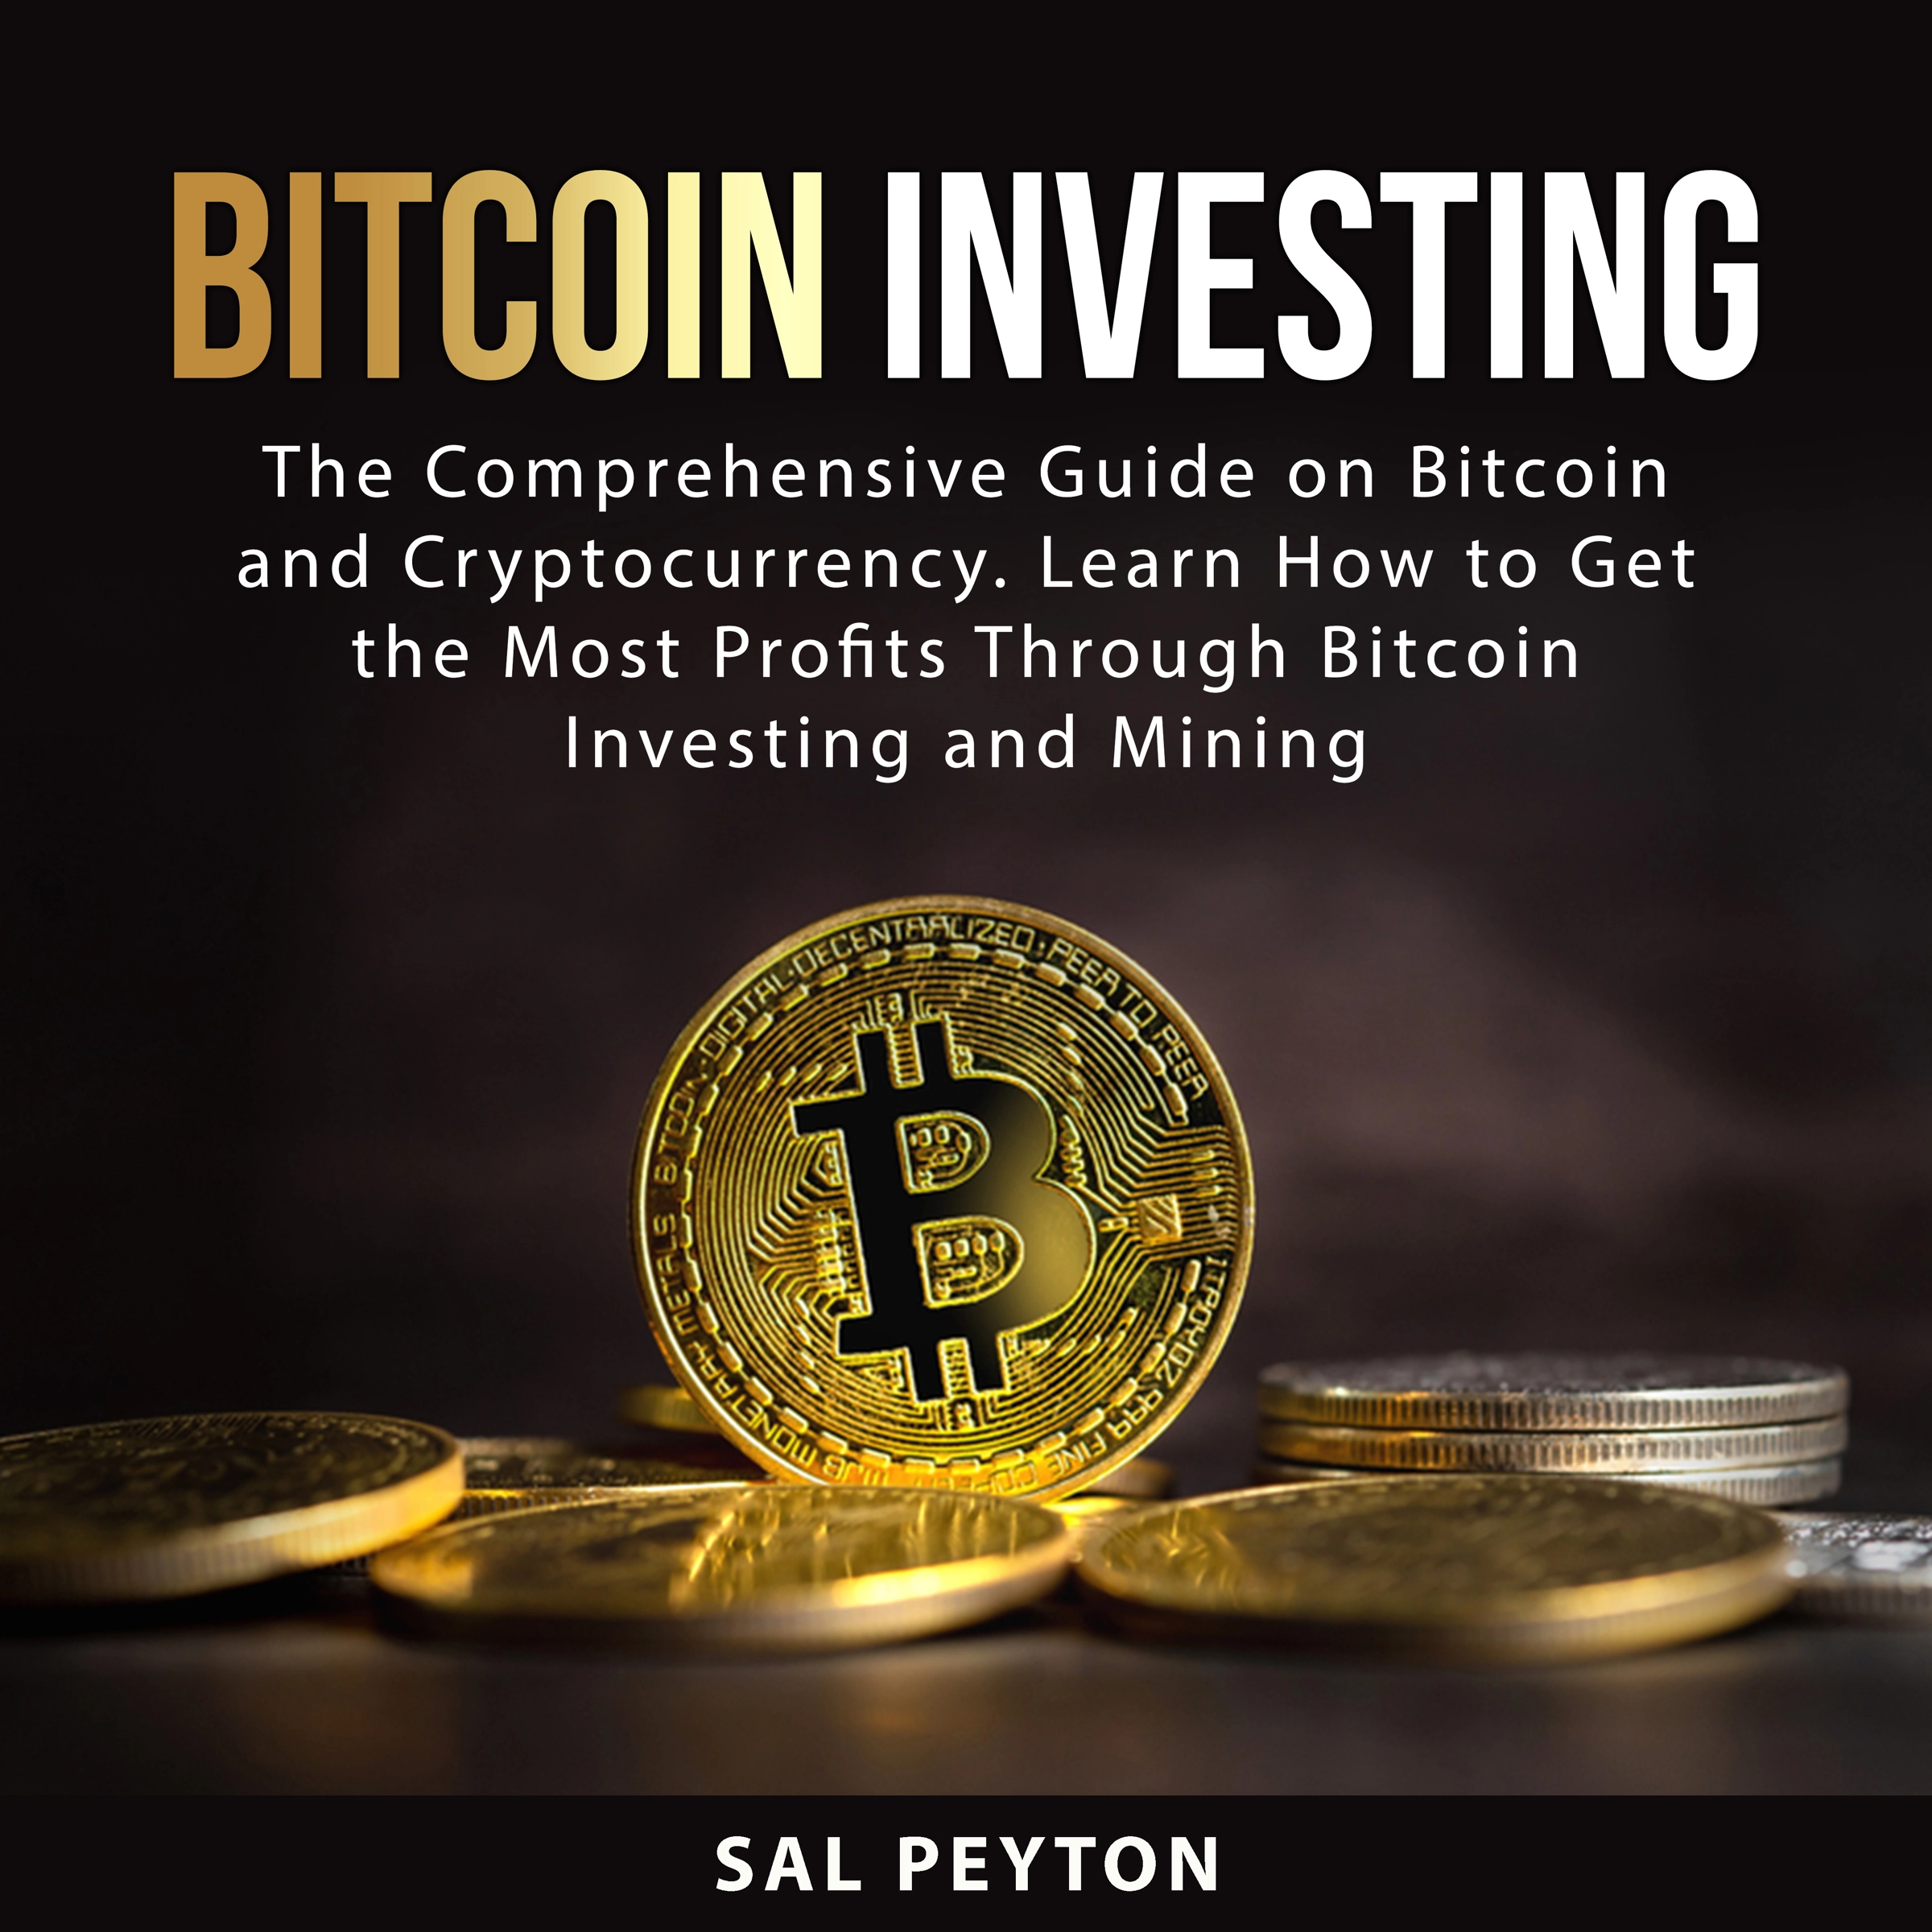 Bitcoin Investing Audiobook by Sal Peyton